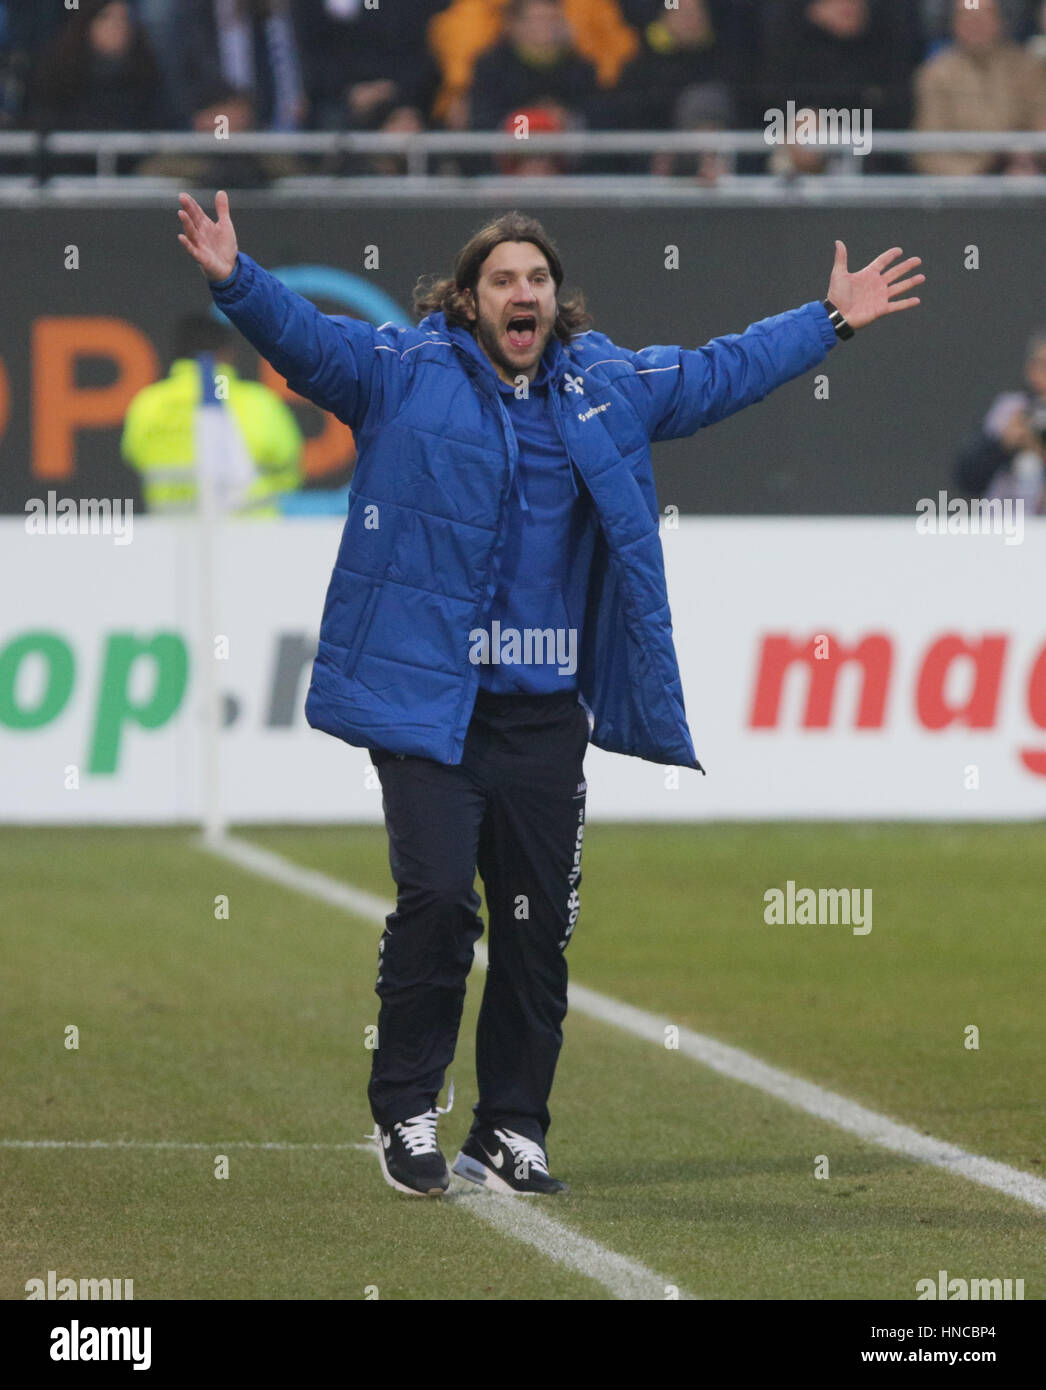 Darmstadt, Germany. 11th Feb, 2017. Darmstadt's coach Torsten Frings celebrates the 2:1 win after the final whistle of the German Bundesliga soccer match between Darmstadt 98 and Borussia Dortmund at the Jonathan Heimes stadium in Darmstadt, Germany, 11 February 2017. Photo: Frank Rumpenhorst/dpa/Alamy Live News Stock Photo